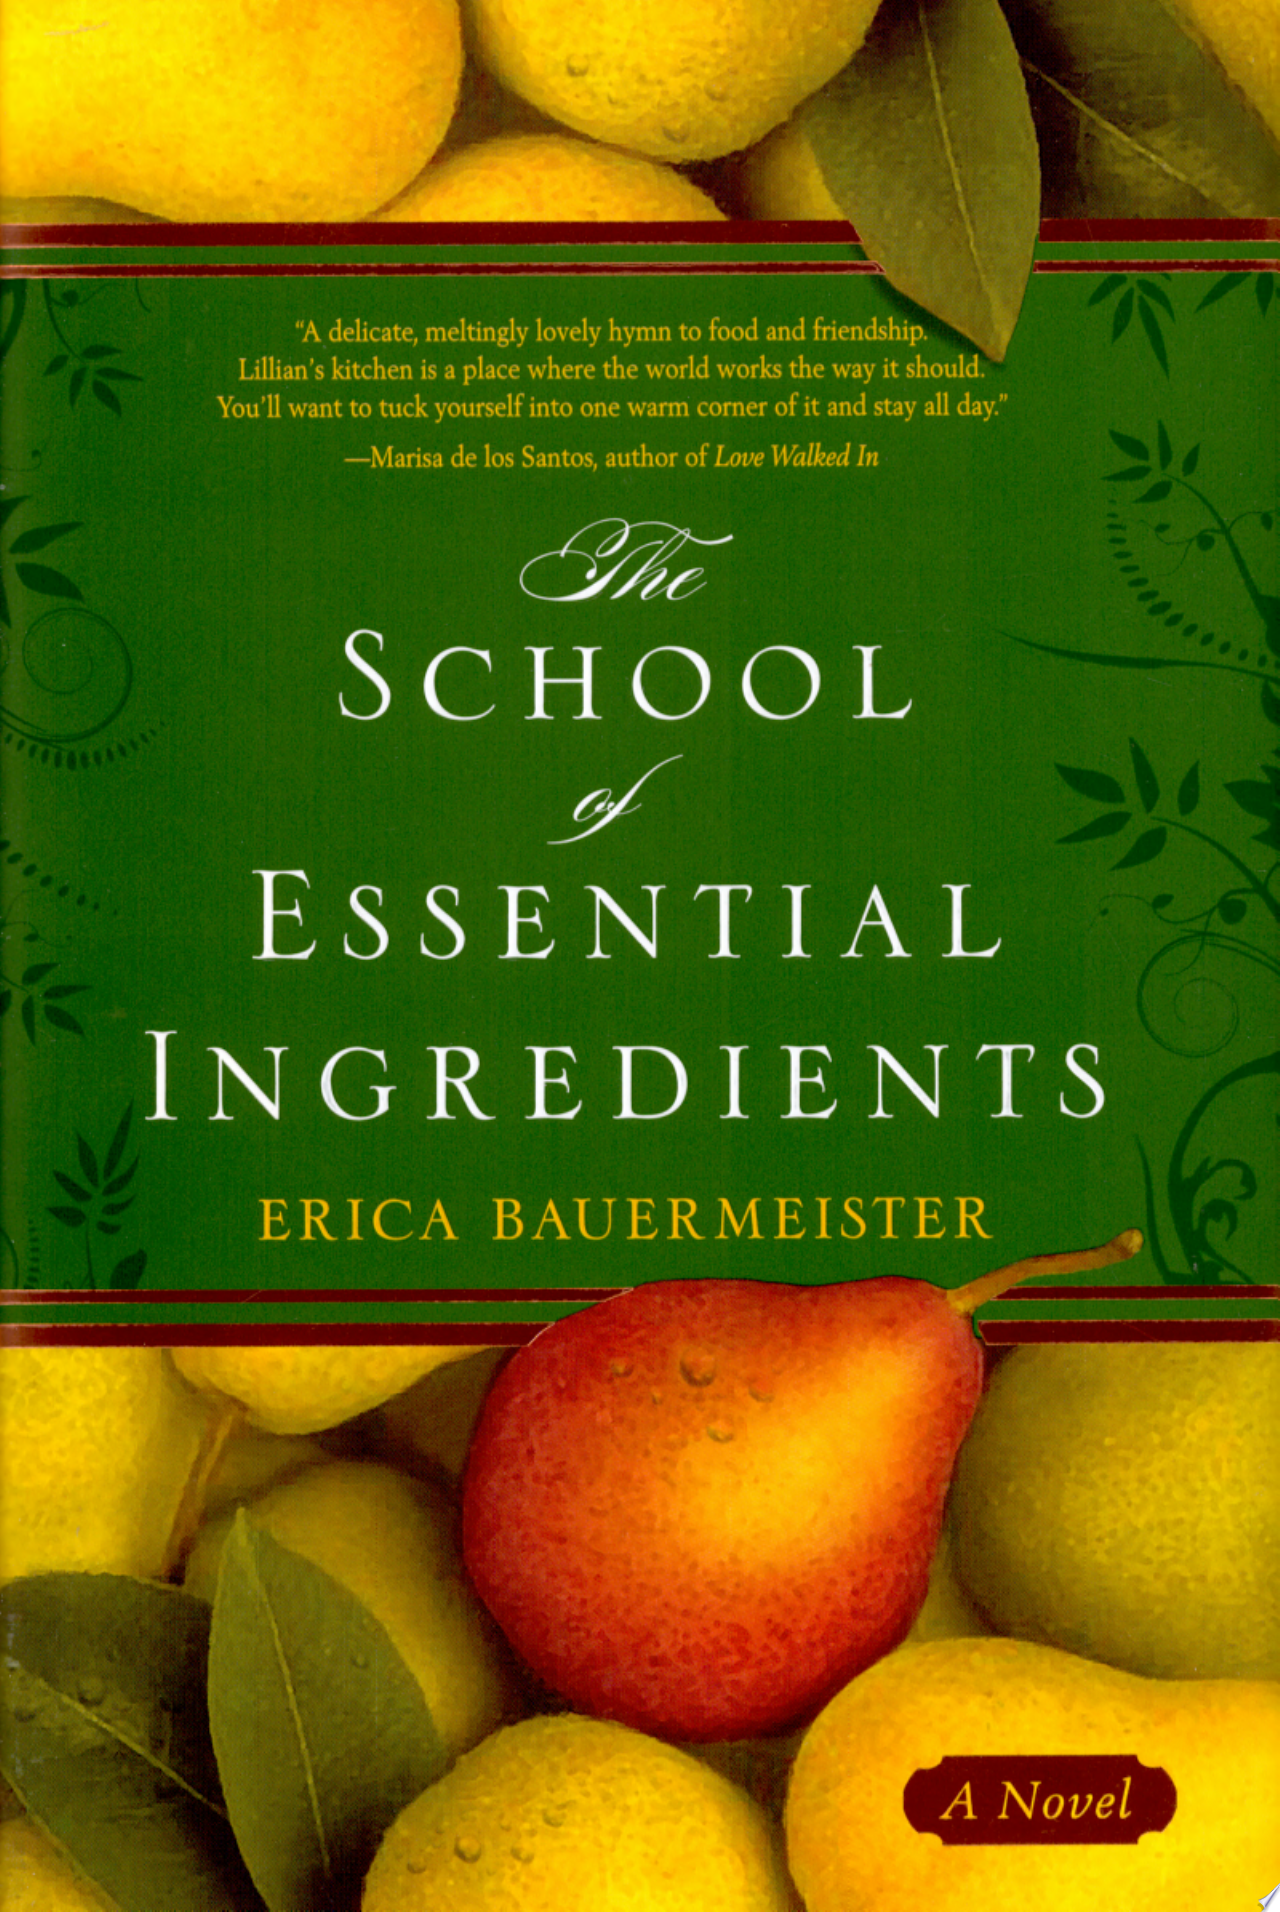 Image for "The School of Essential Ingredients"